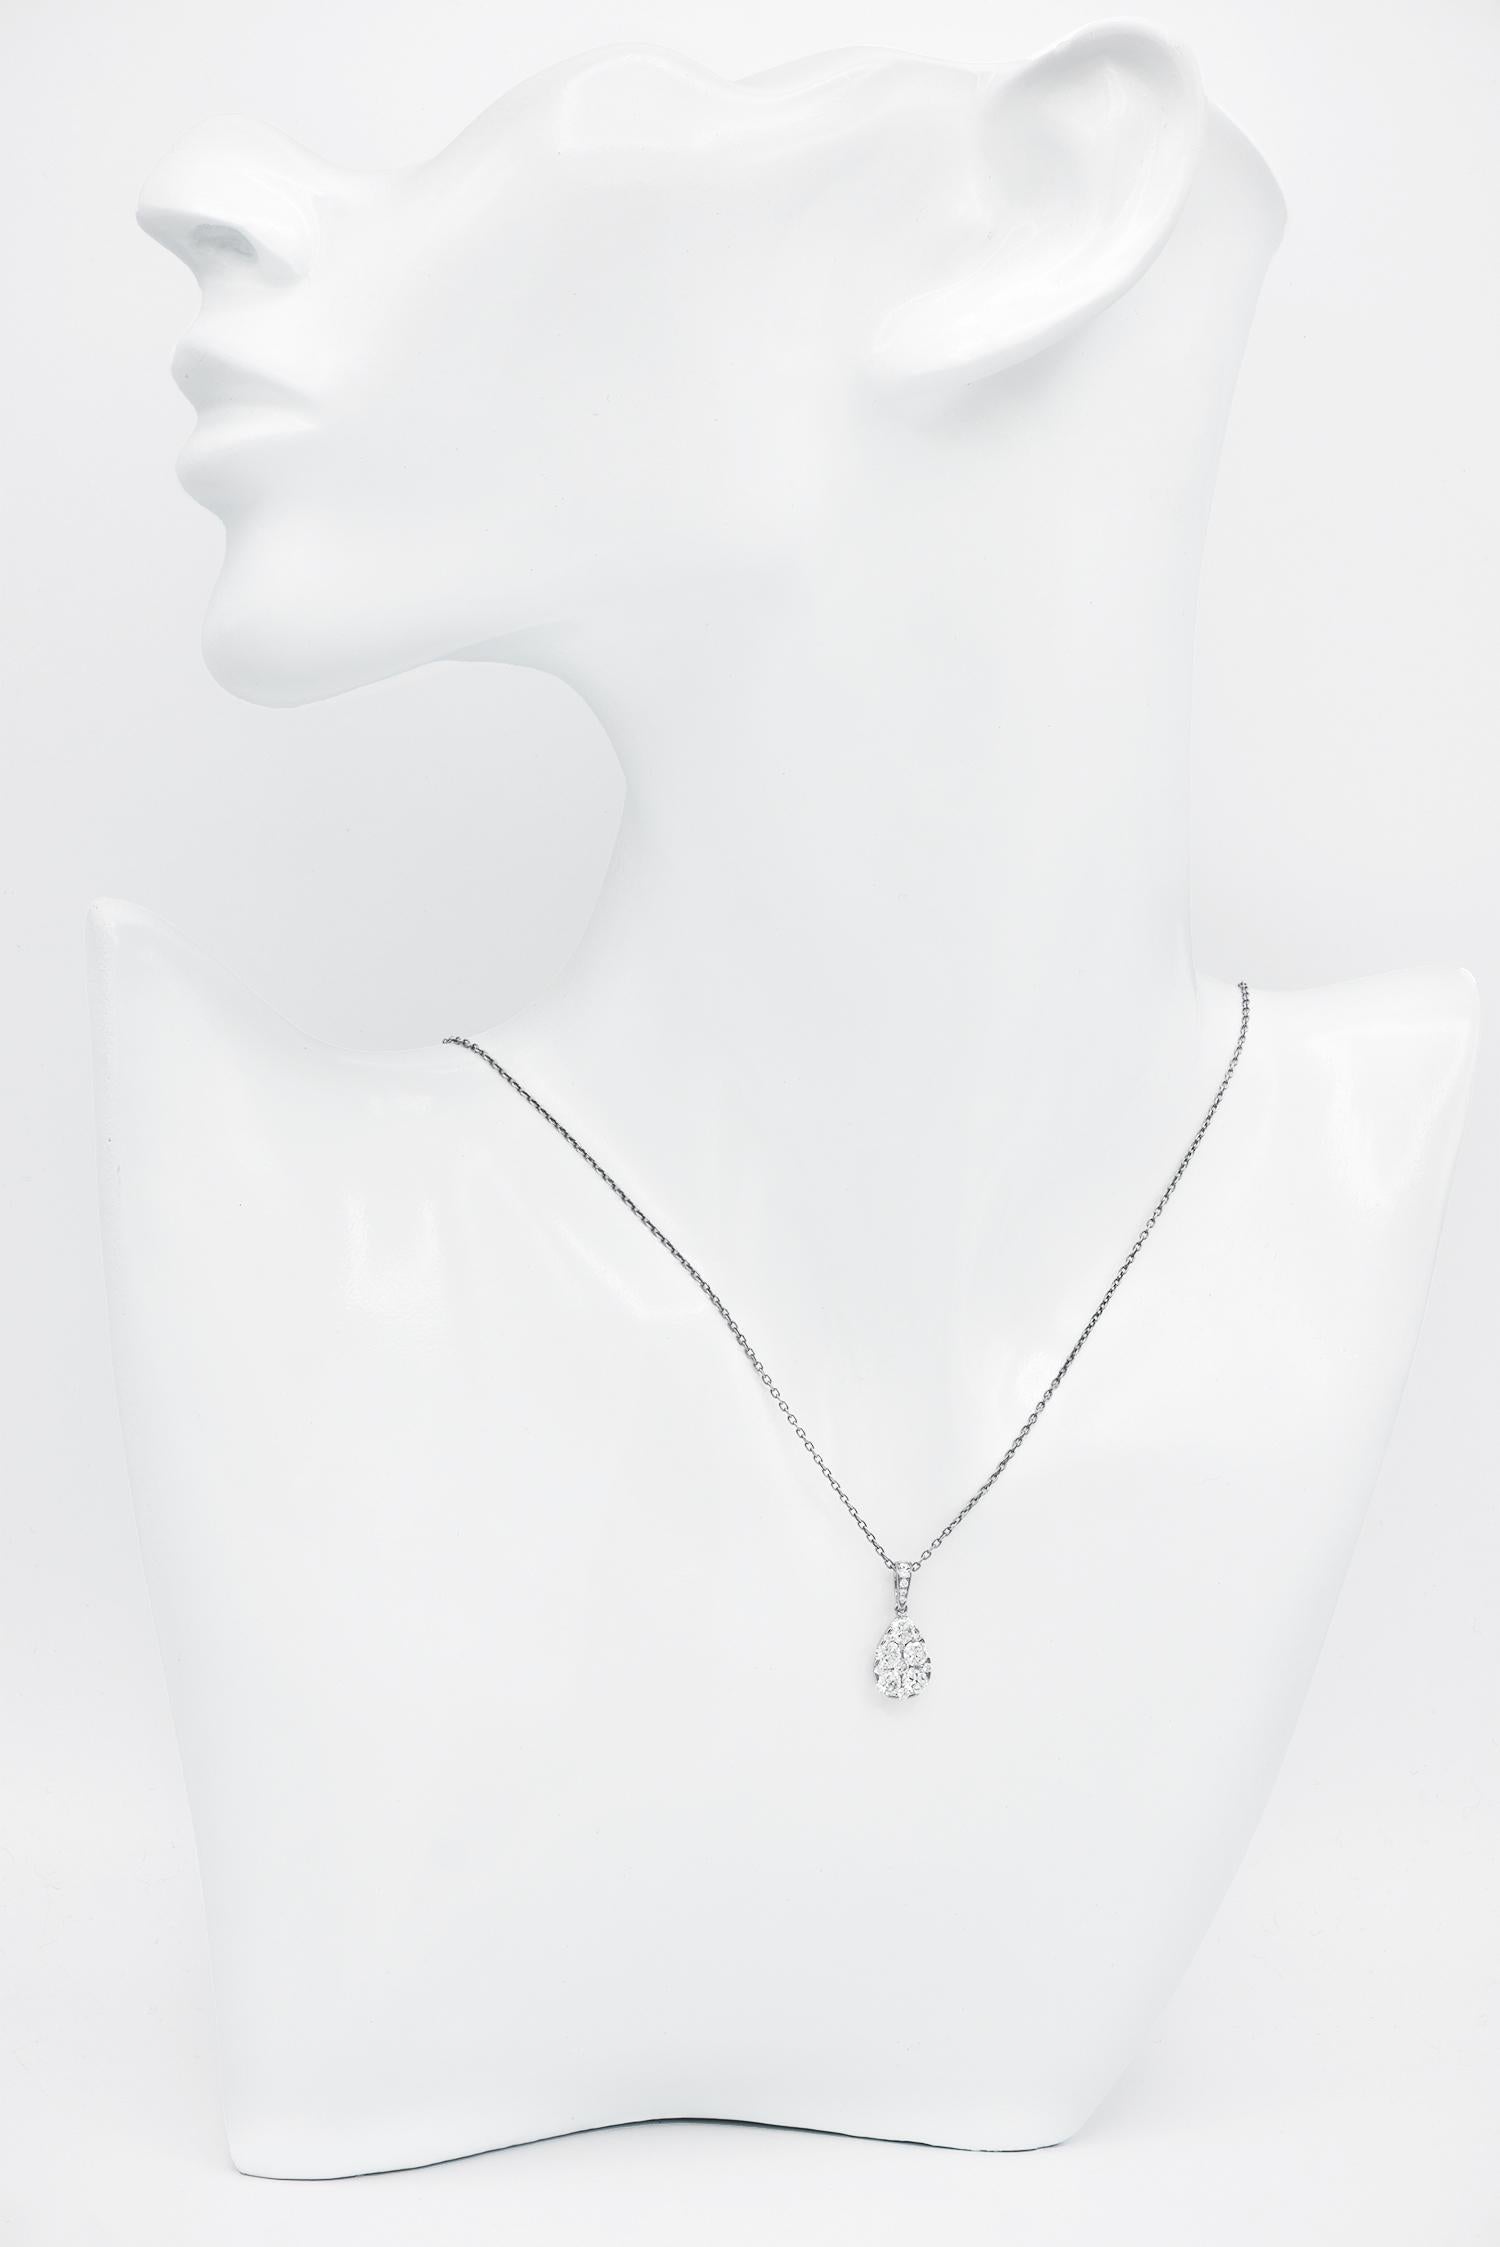 Round Cut 18K White Gold Drop Shape Diamond Cluster Pendant with Chain For Sale